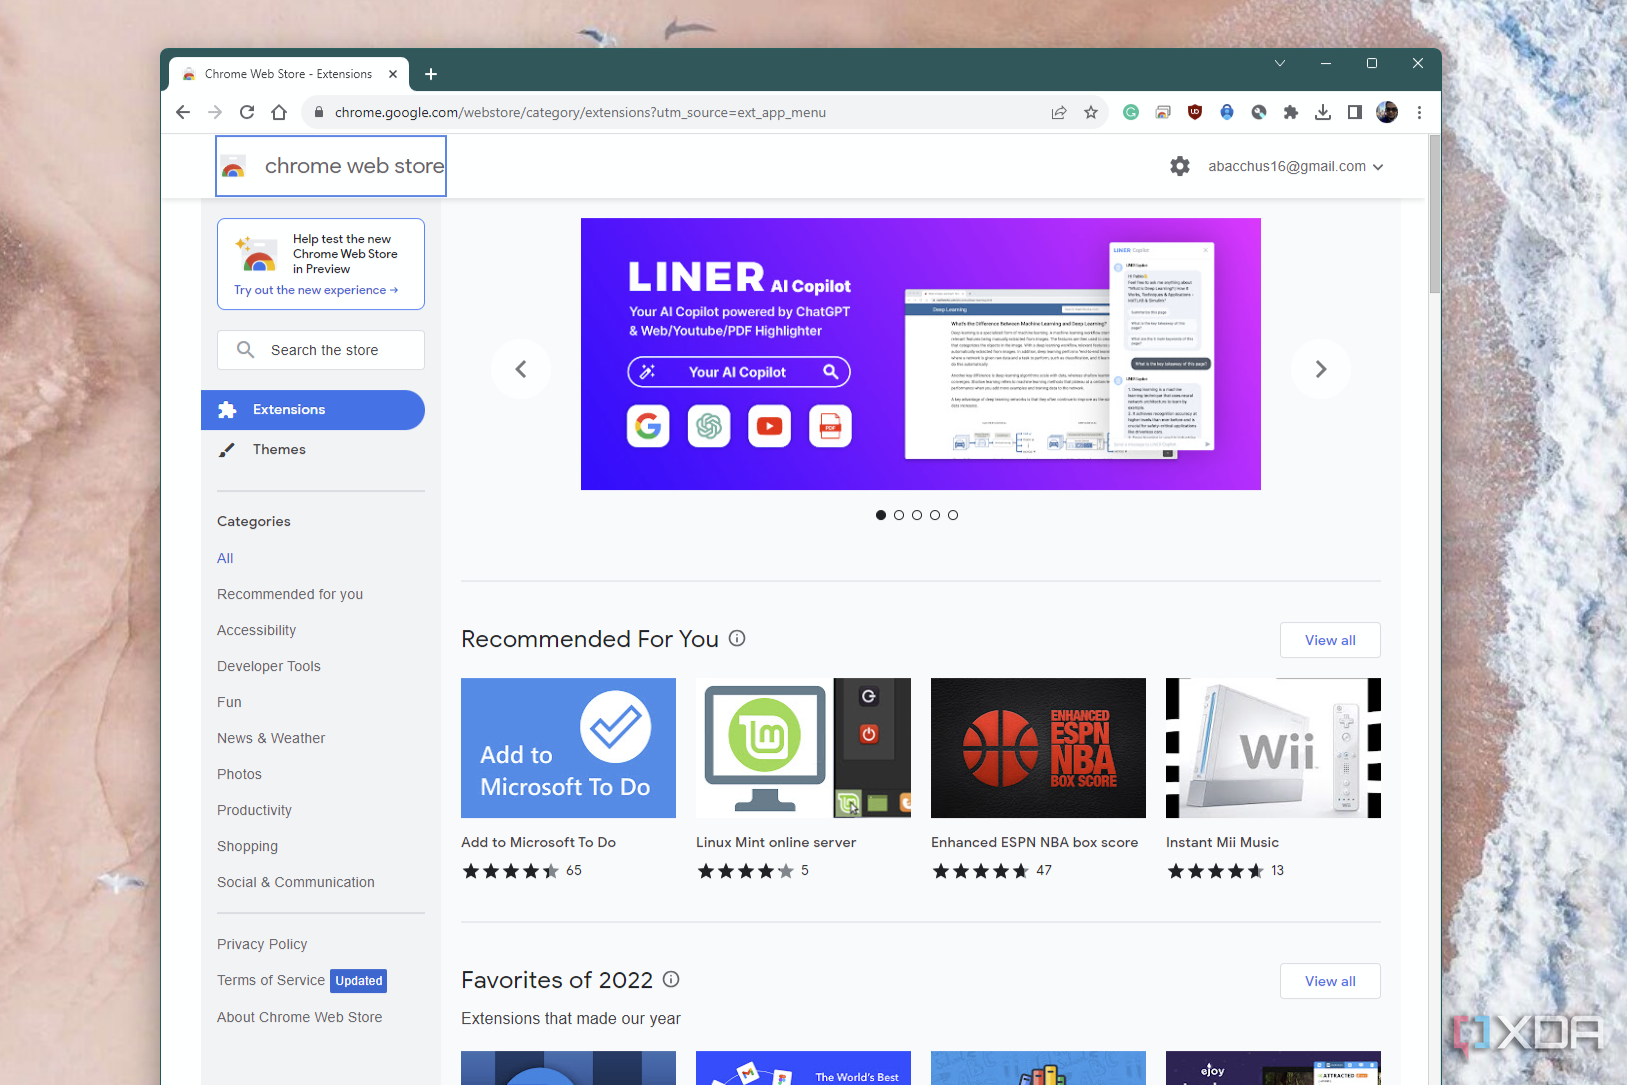 A screenshot of the Chrome Web Store running on Google Chrome on Windows with ads for extensions 